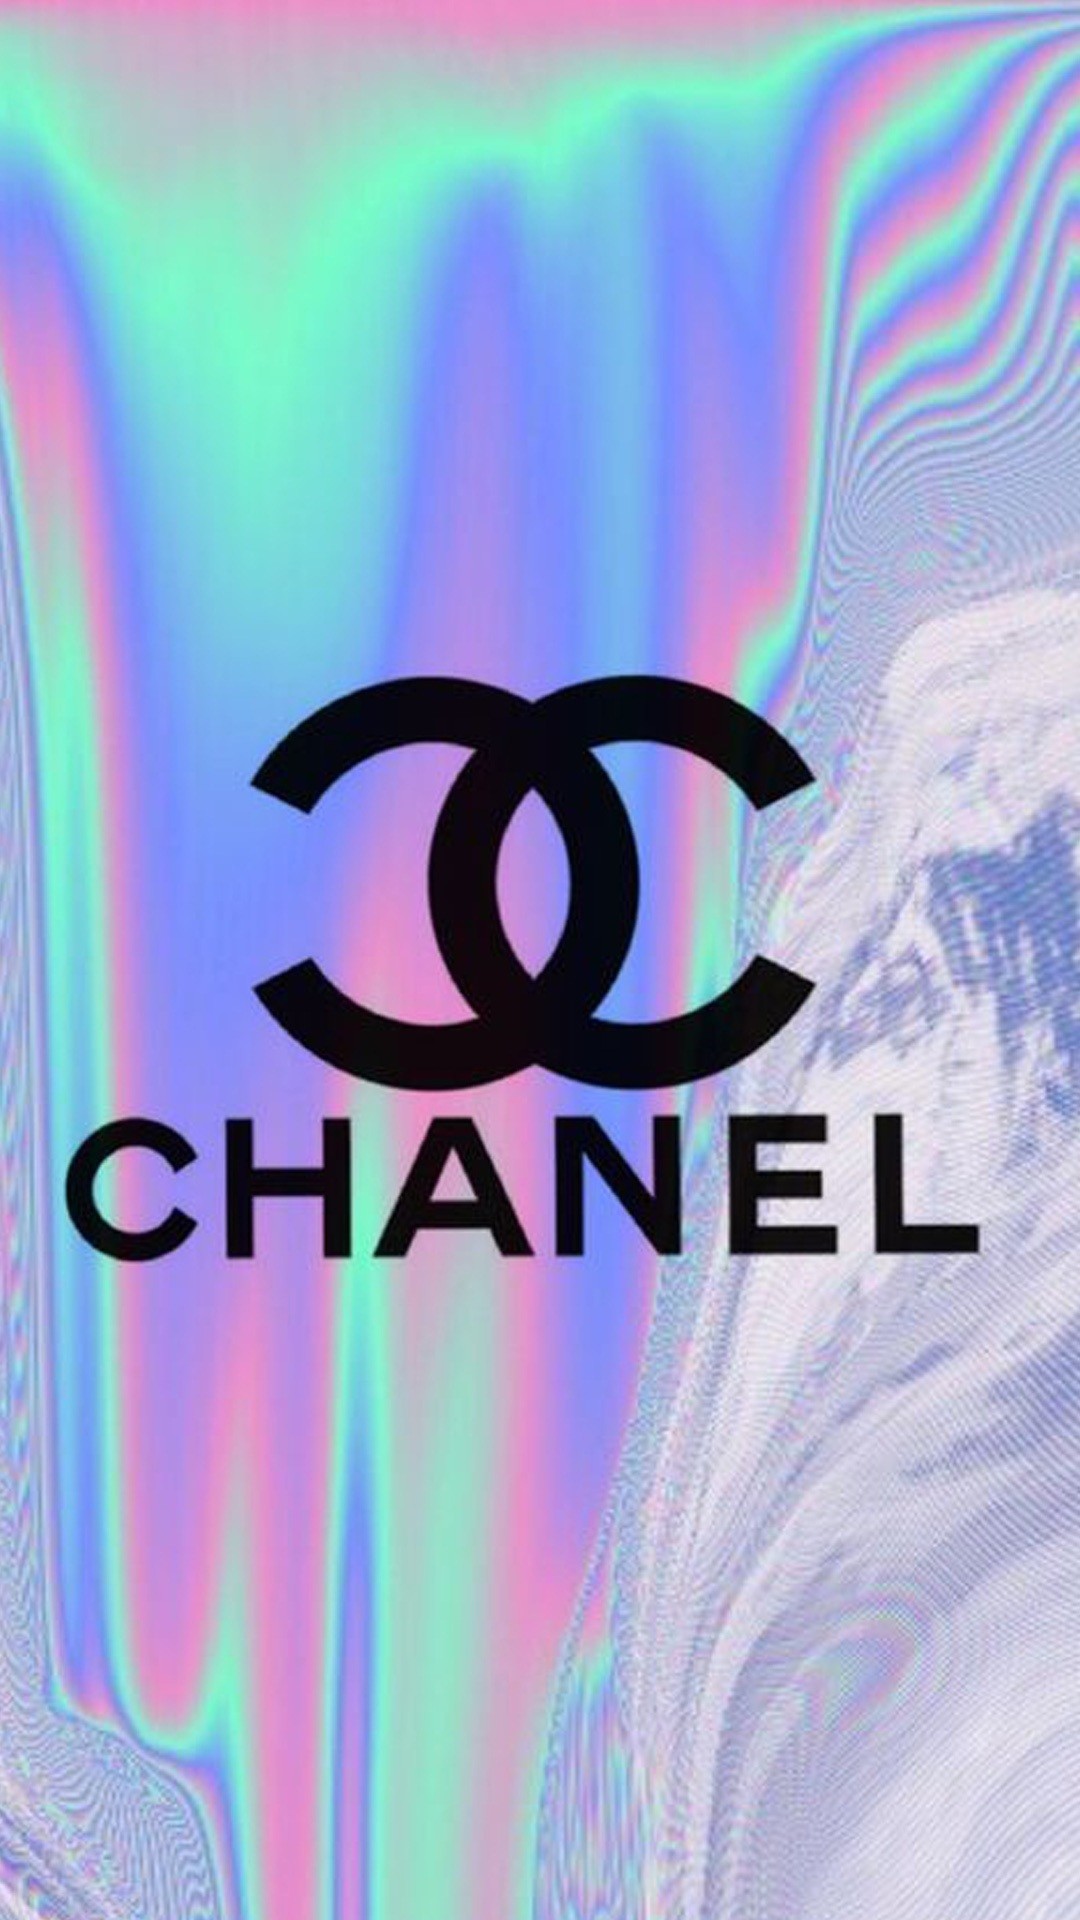 1080x1920 Girly Chanel Iphone Wallpaper Wallpapers For Iphone | Background Wallpapers